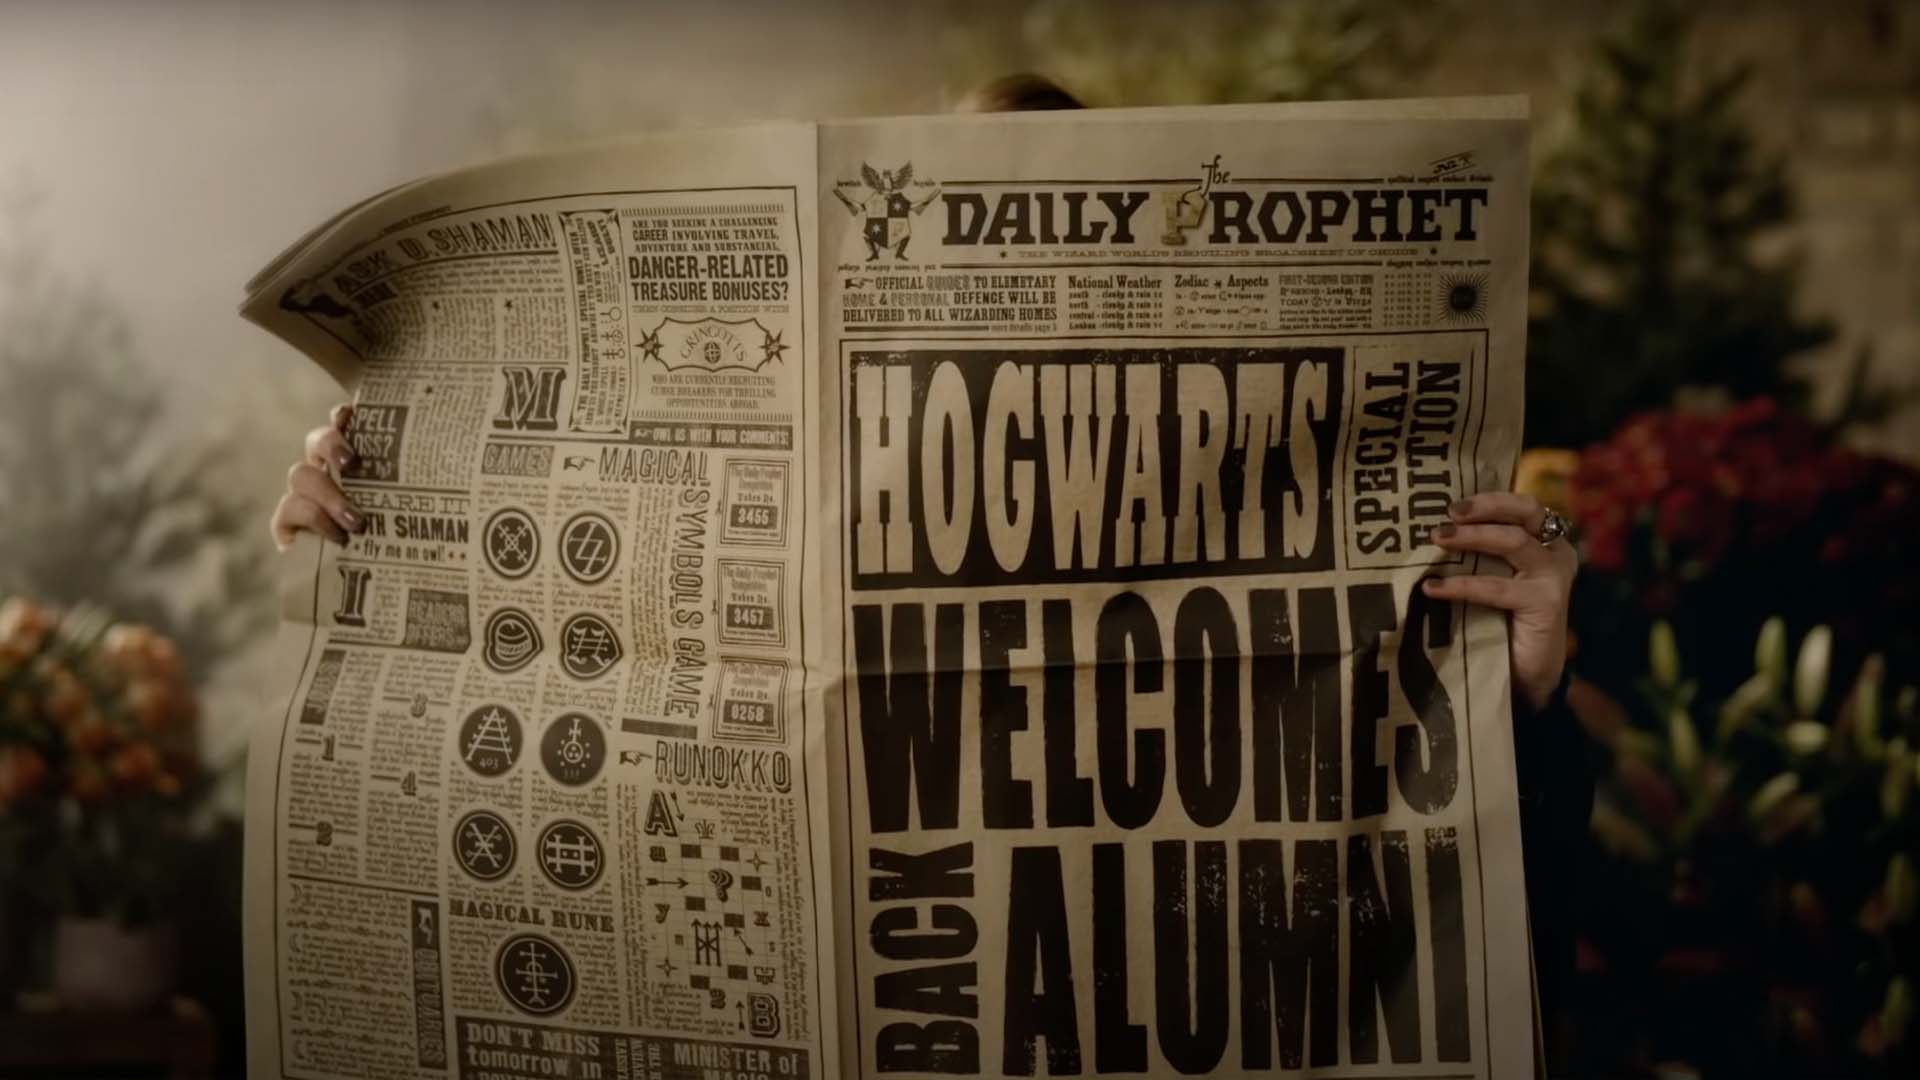 Welcome home – the Harry Potter characters who found home at Hogwarts